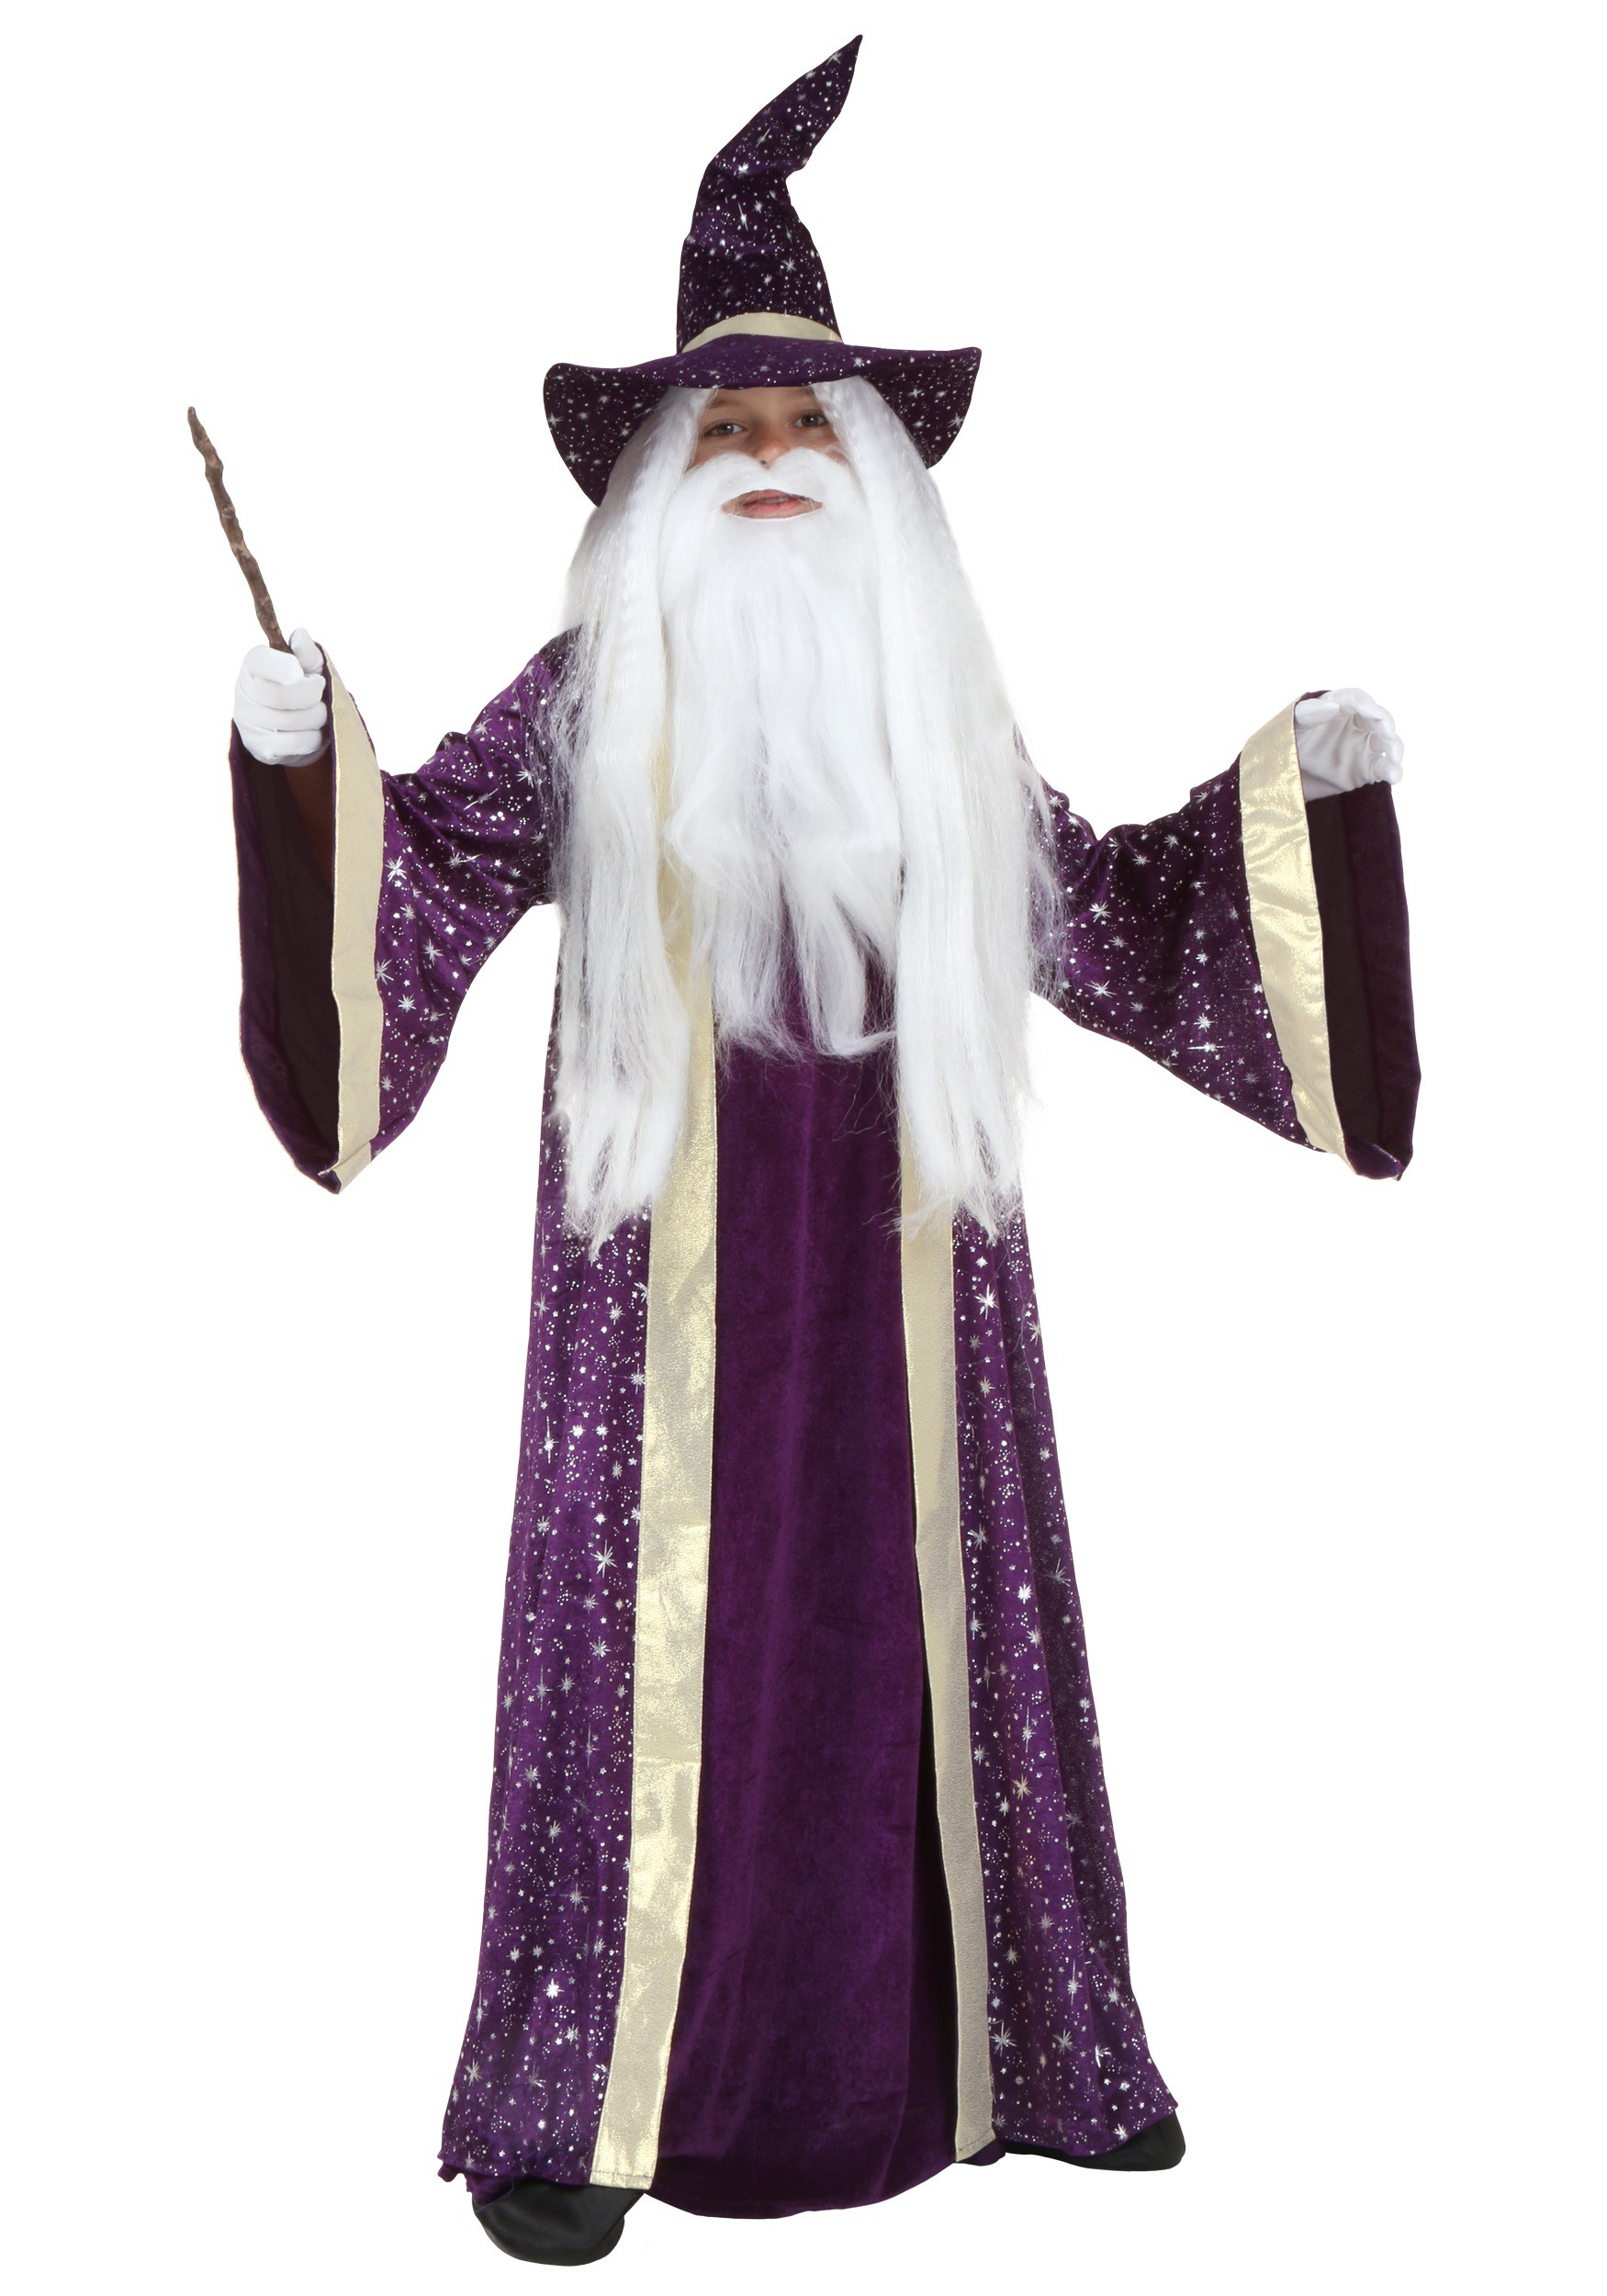 Kleding Unisex kinderkleding pakken Wizard Robe for 2-15 Years Old Girls and Boys Halloween Party Costumes Wizard Themed Party Costumes, 